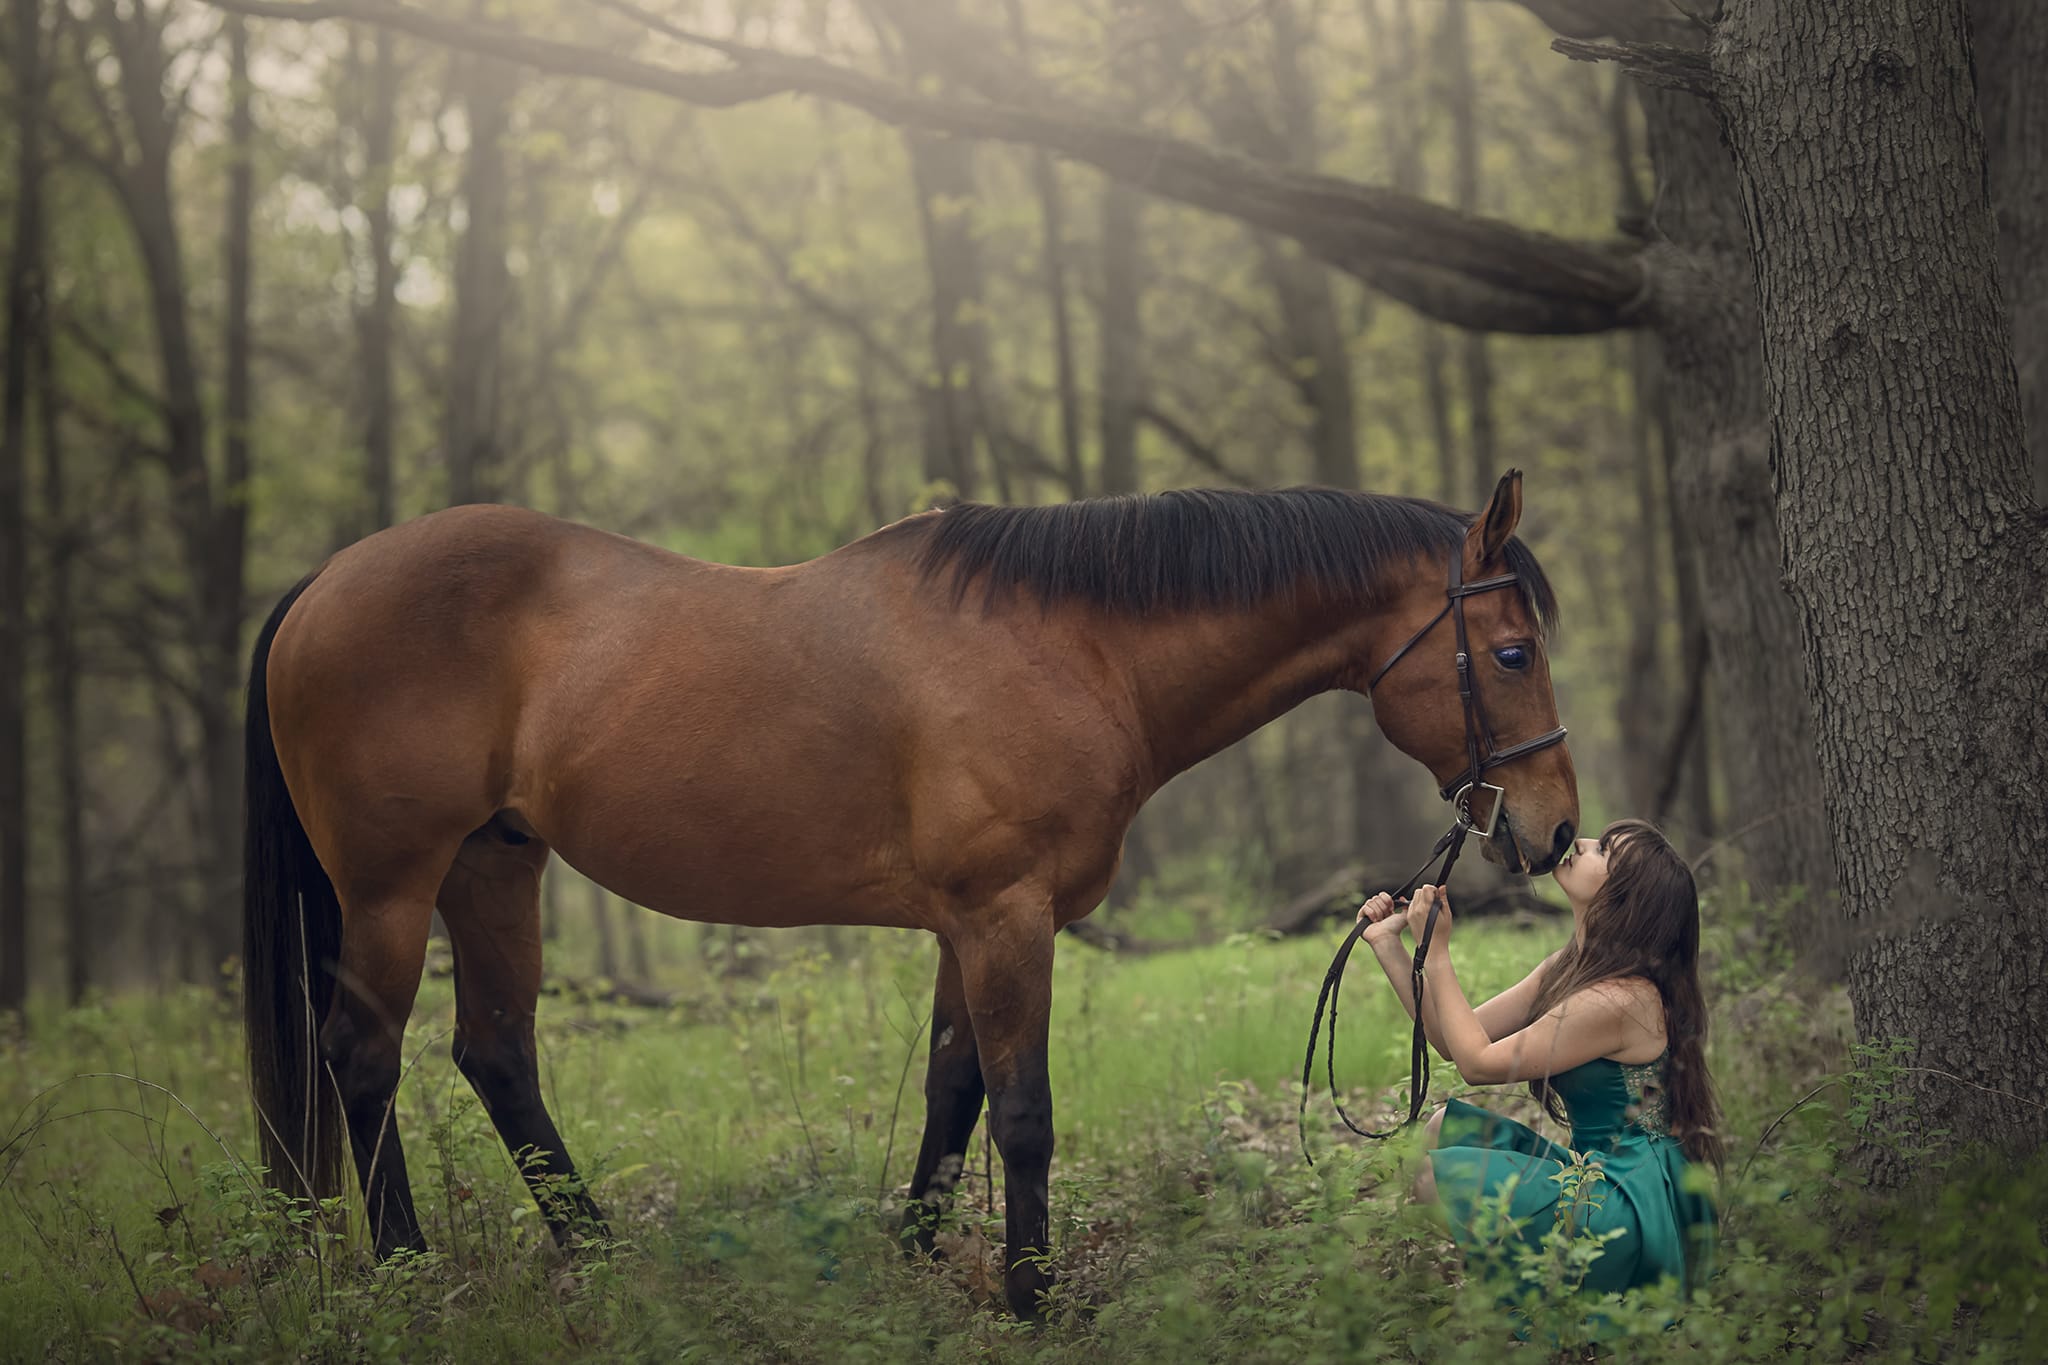 Michigan photographer's depiction of horse and rider in forest near Detroit